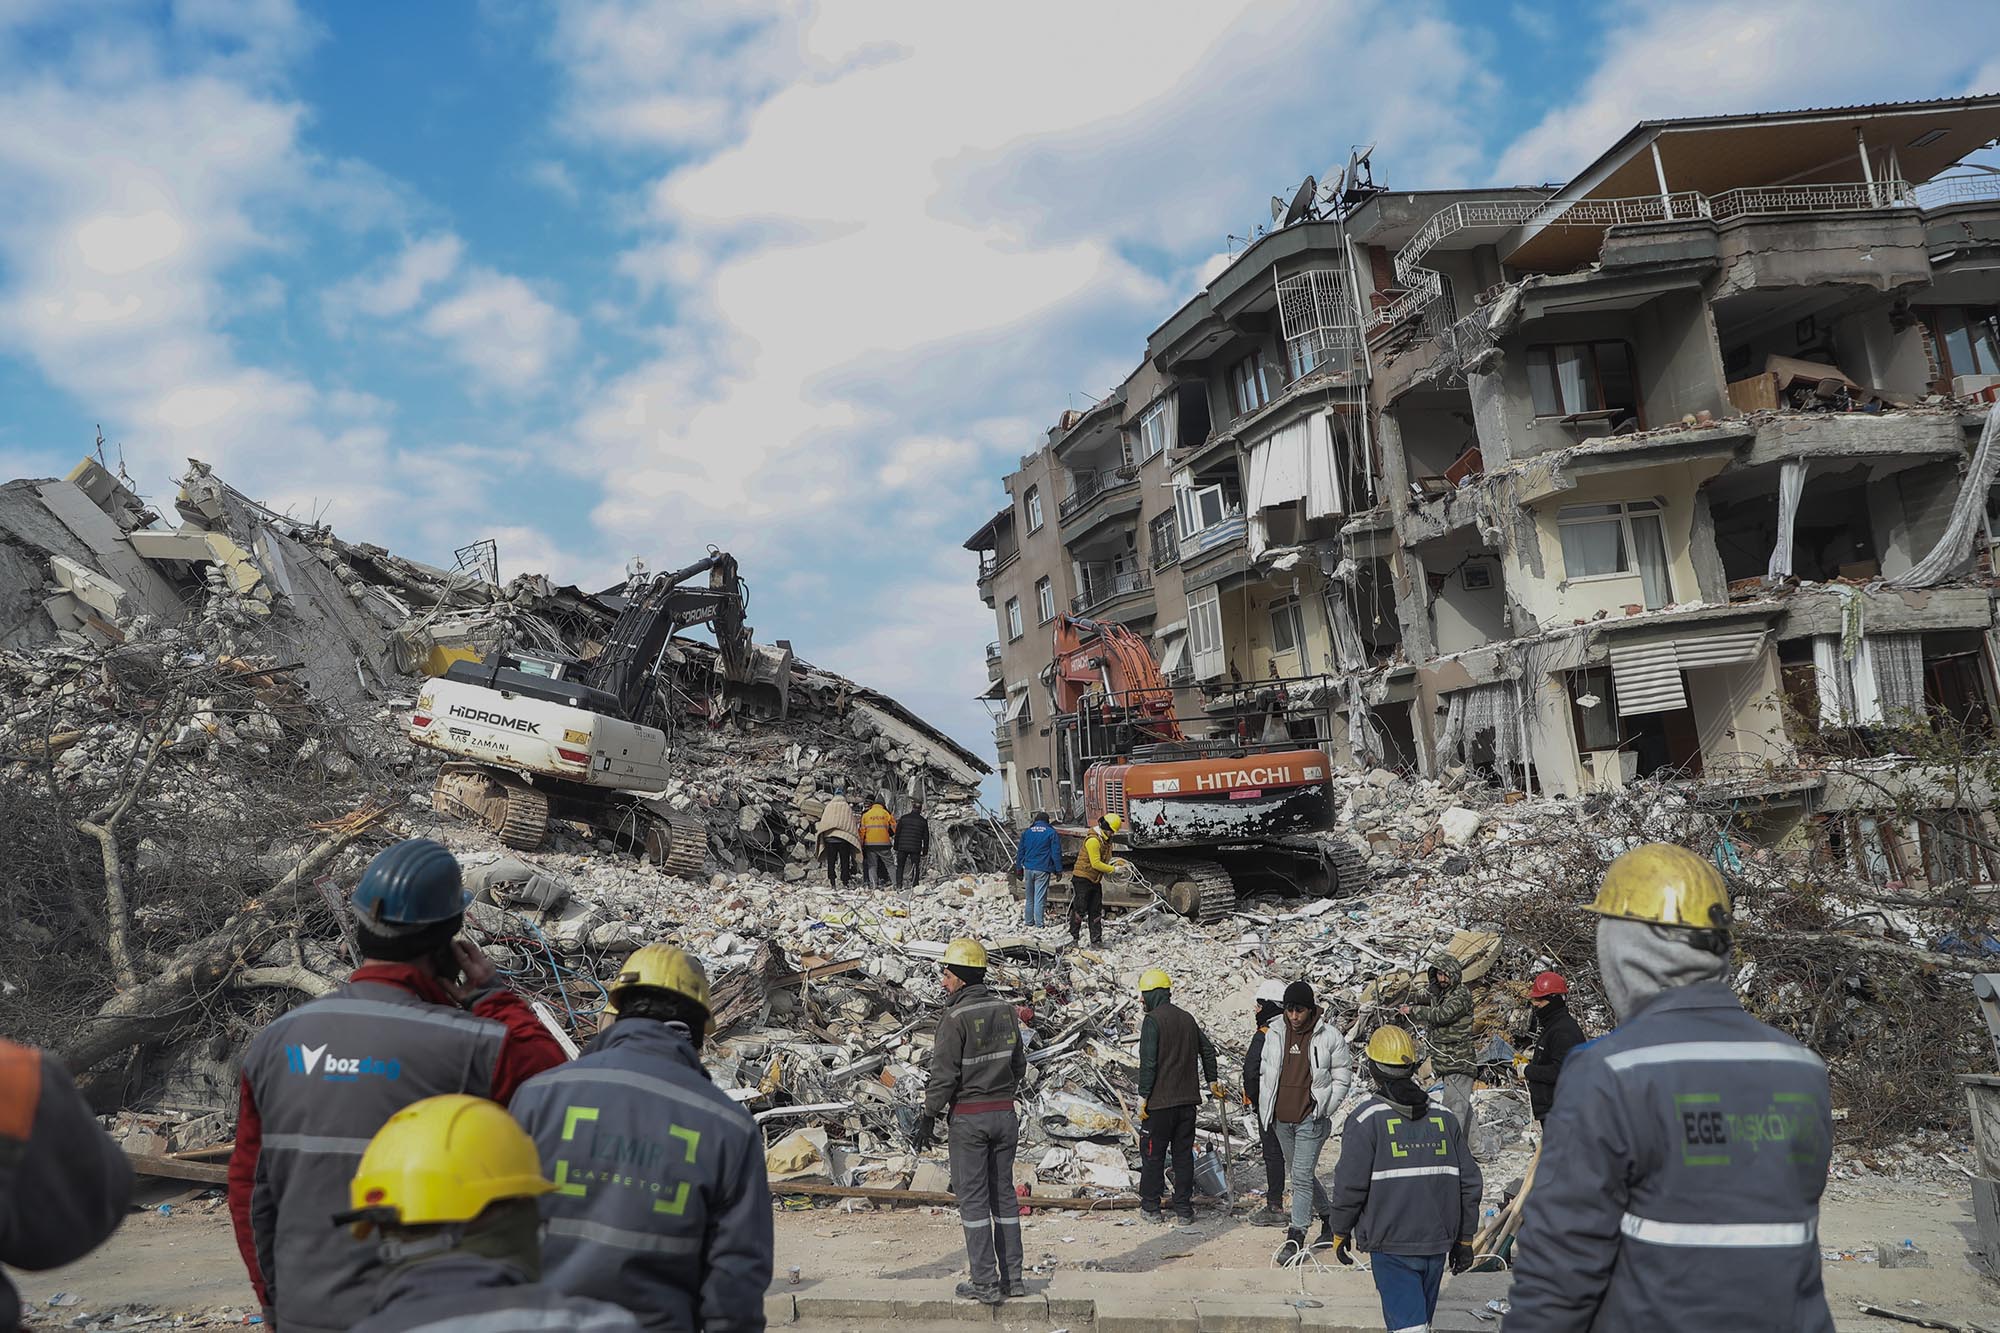 Heavy machinery works on the debris of a collapsed building in Hatay, Turkey, on February 11.